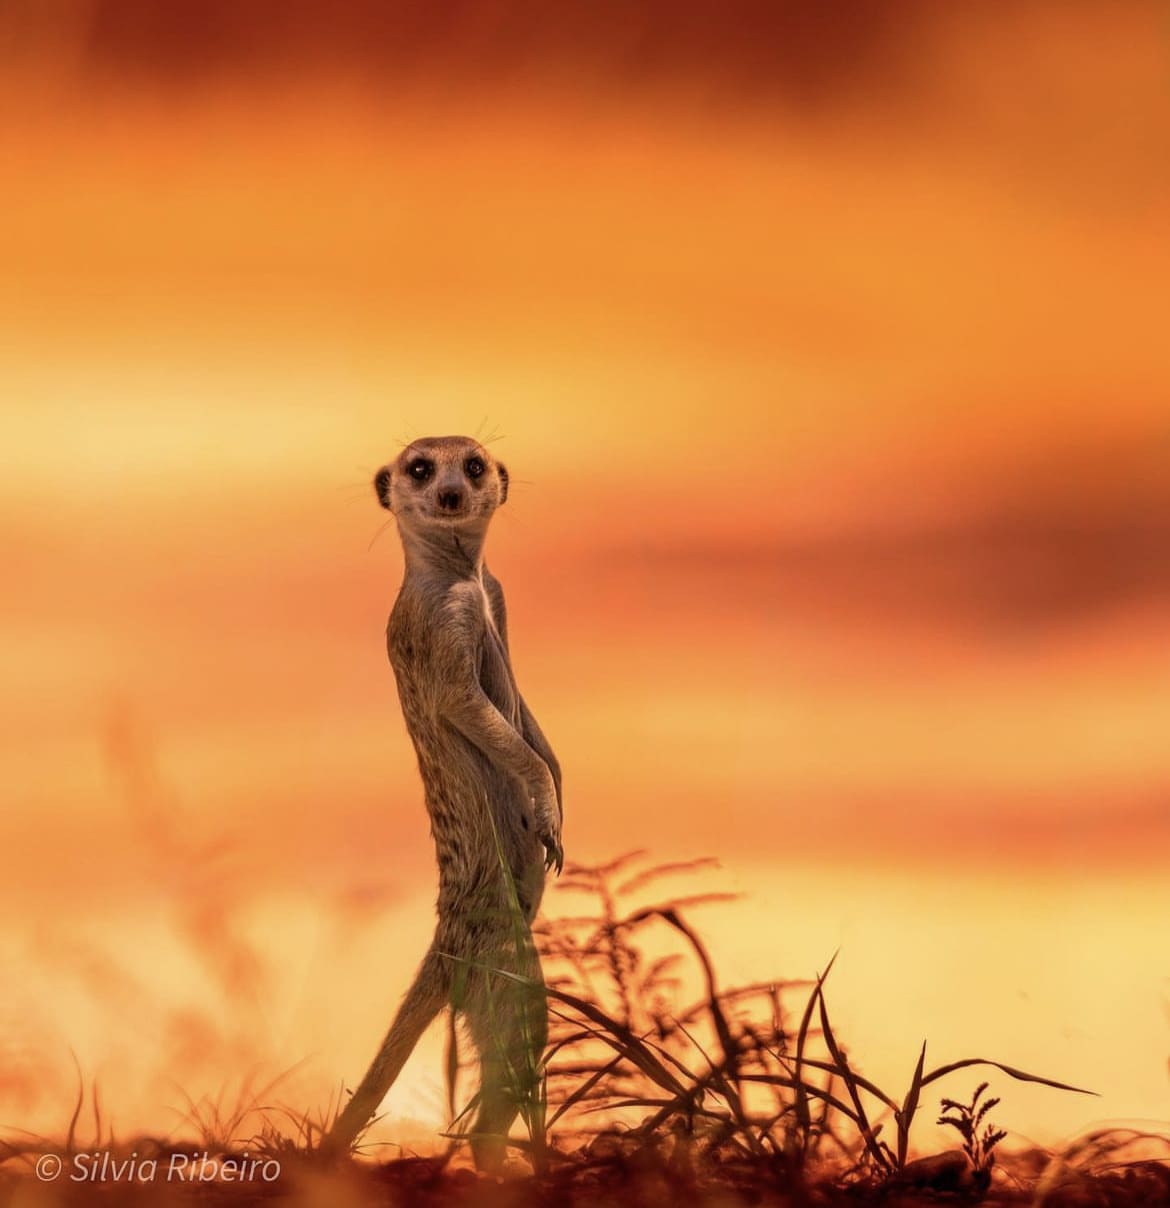 A Meerkat stands up in front of a golden, African sky